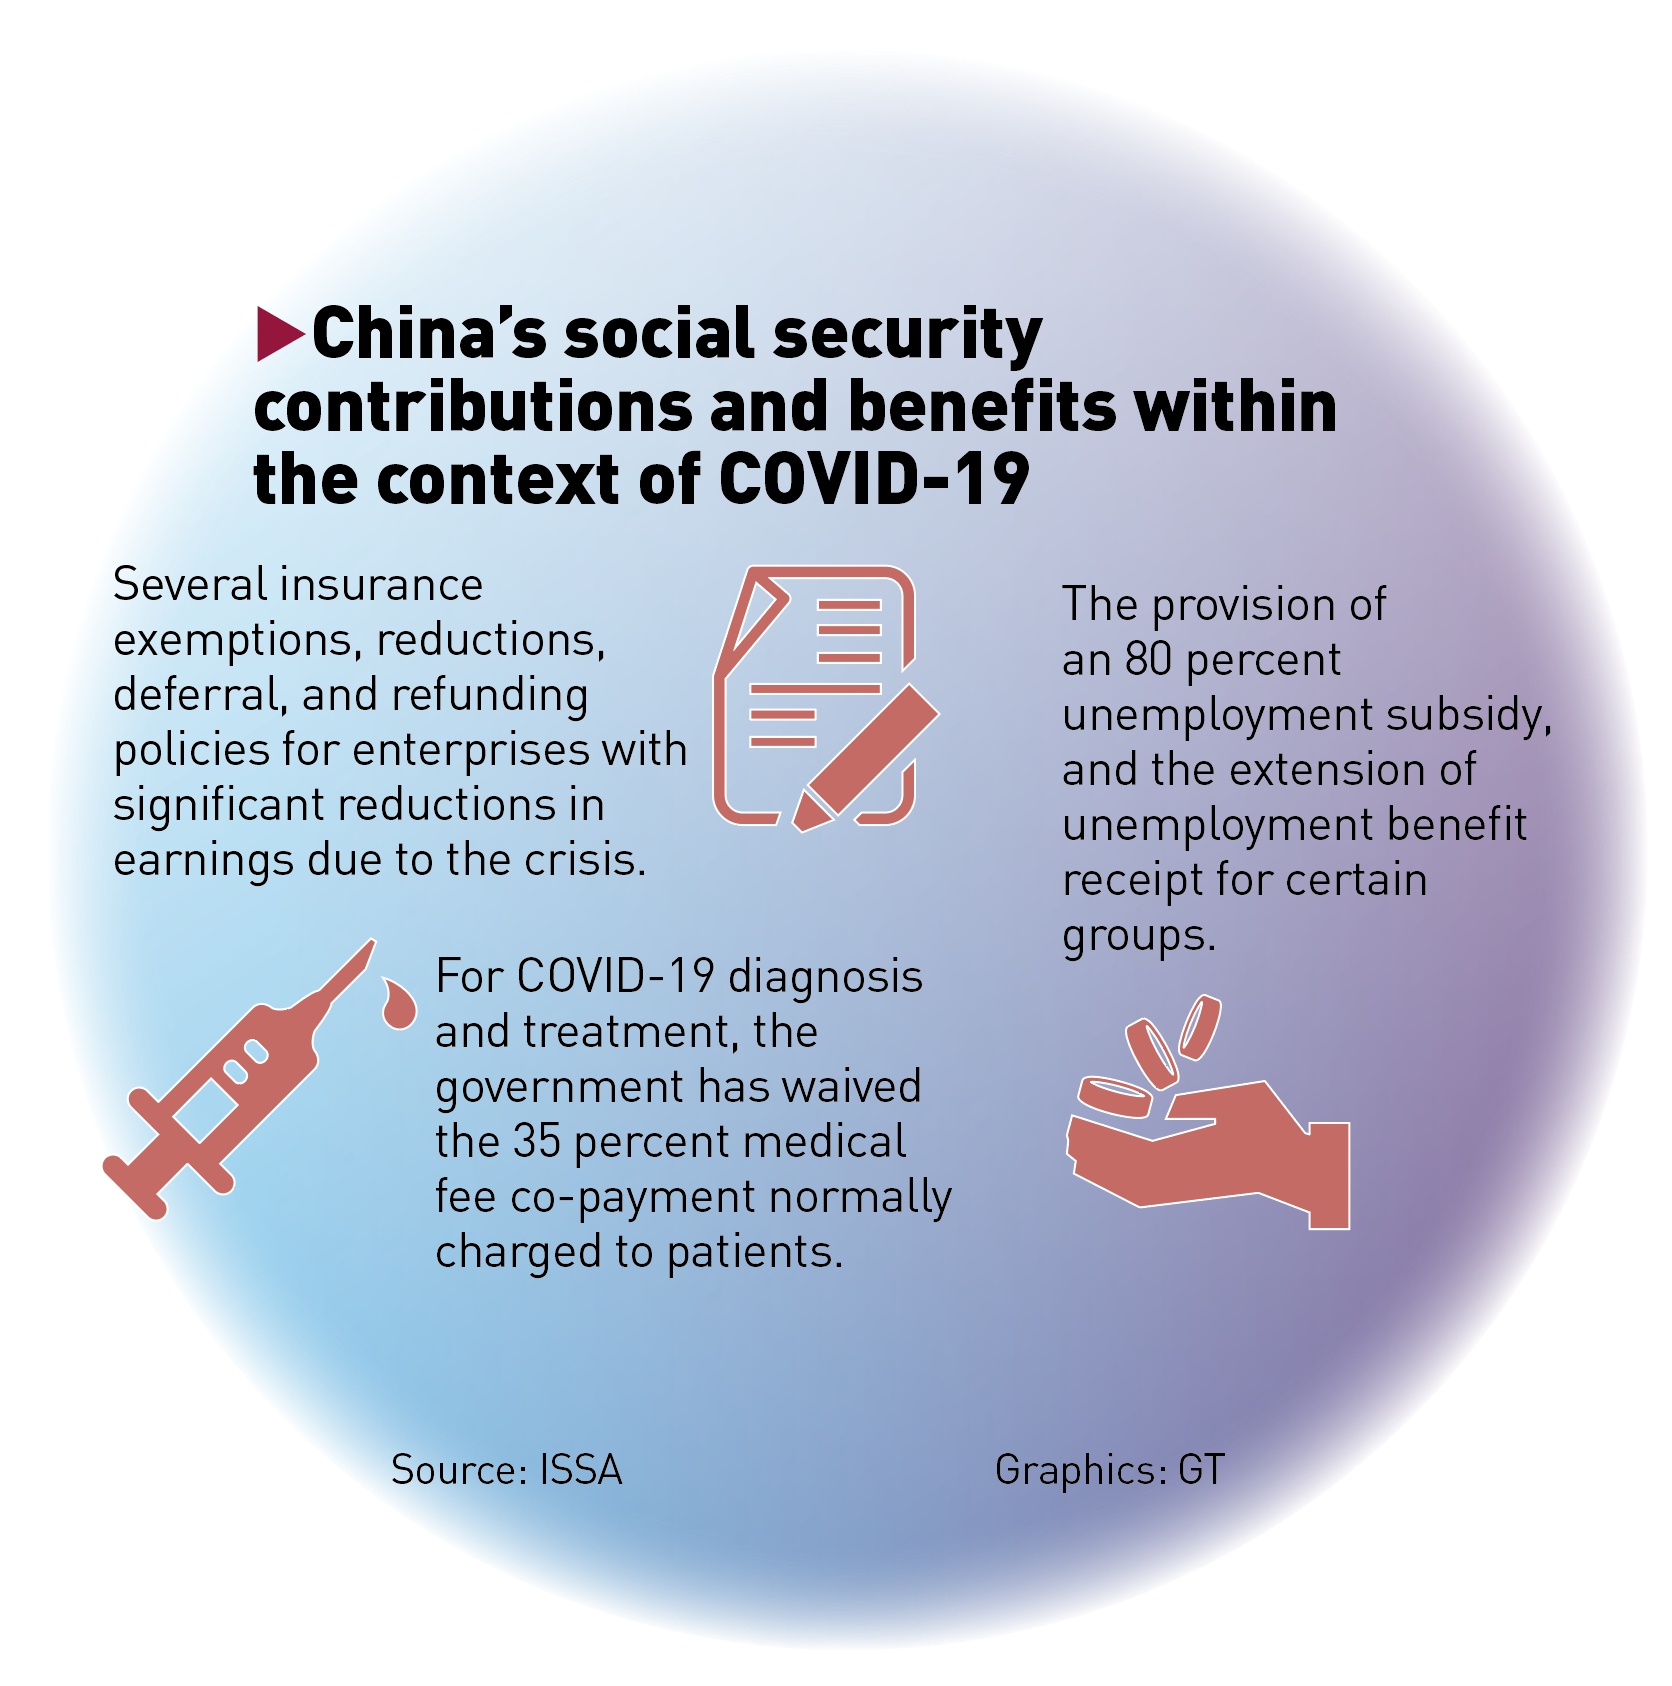 China's social security contributions and benefits within the context of COVID-19. Graphics: GT